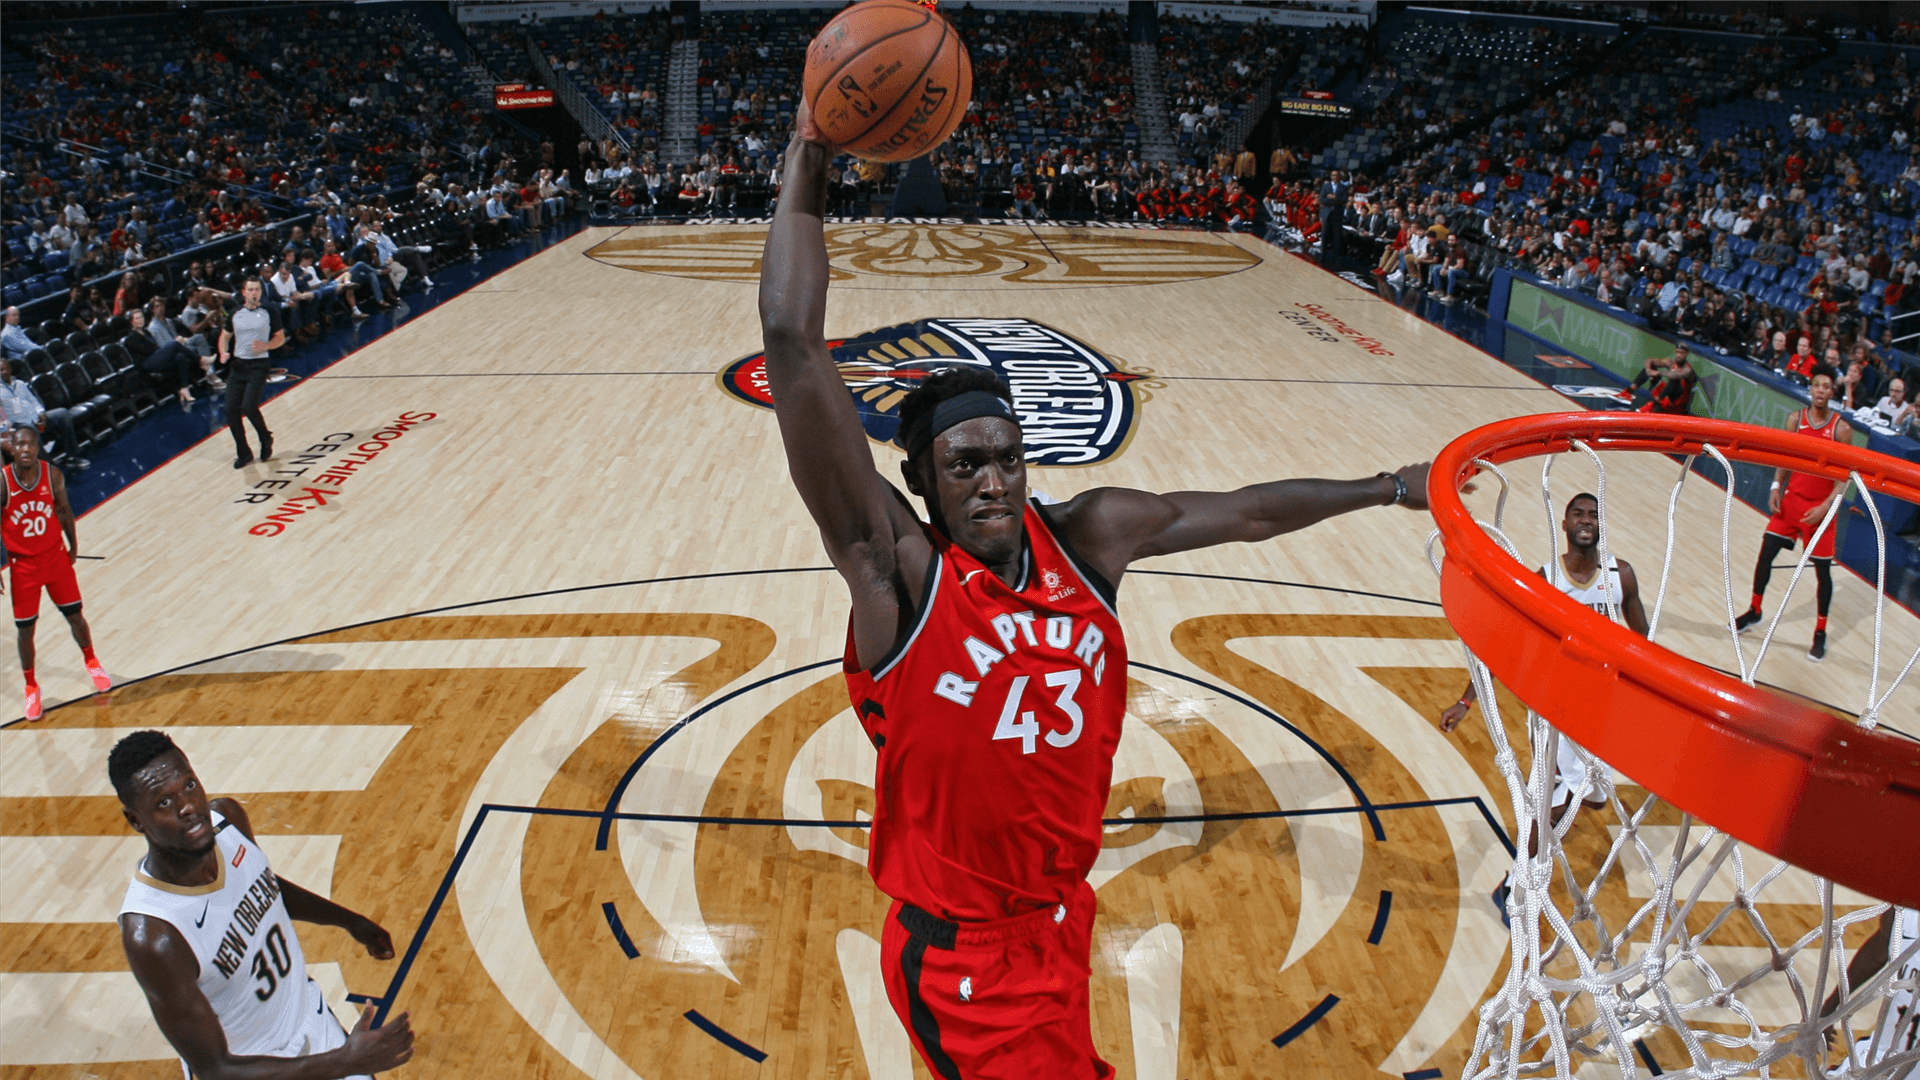 Pascal Siakam is a breakout star, one of the NBA's best forwards